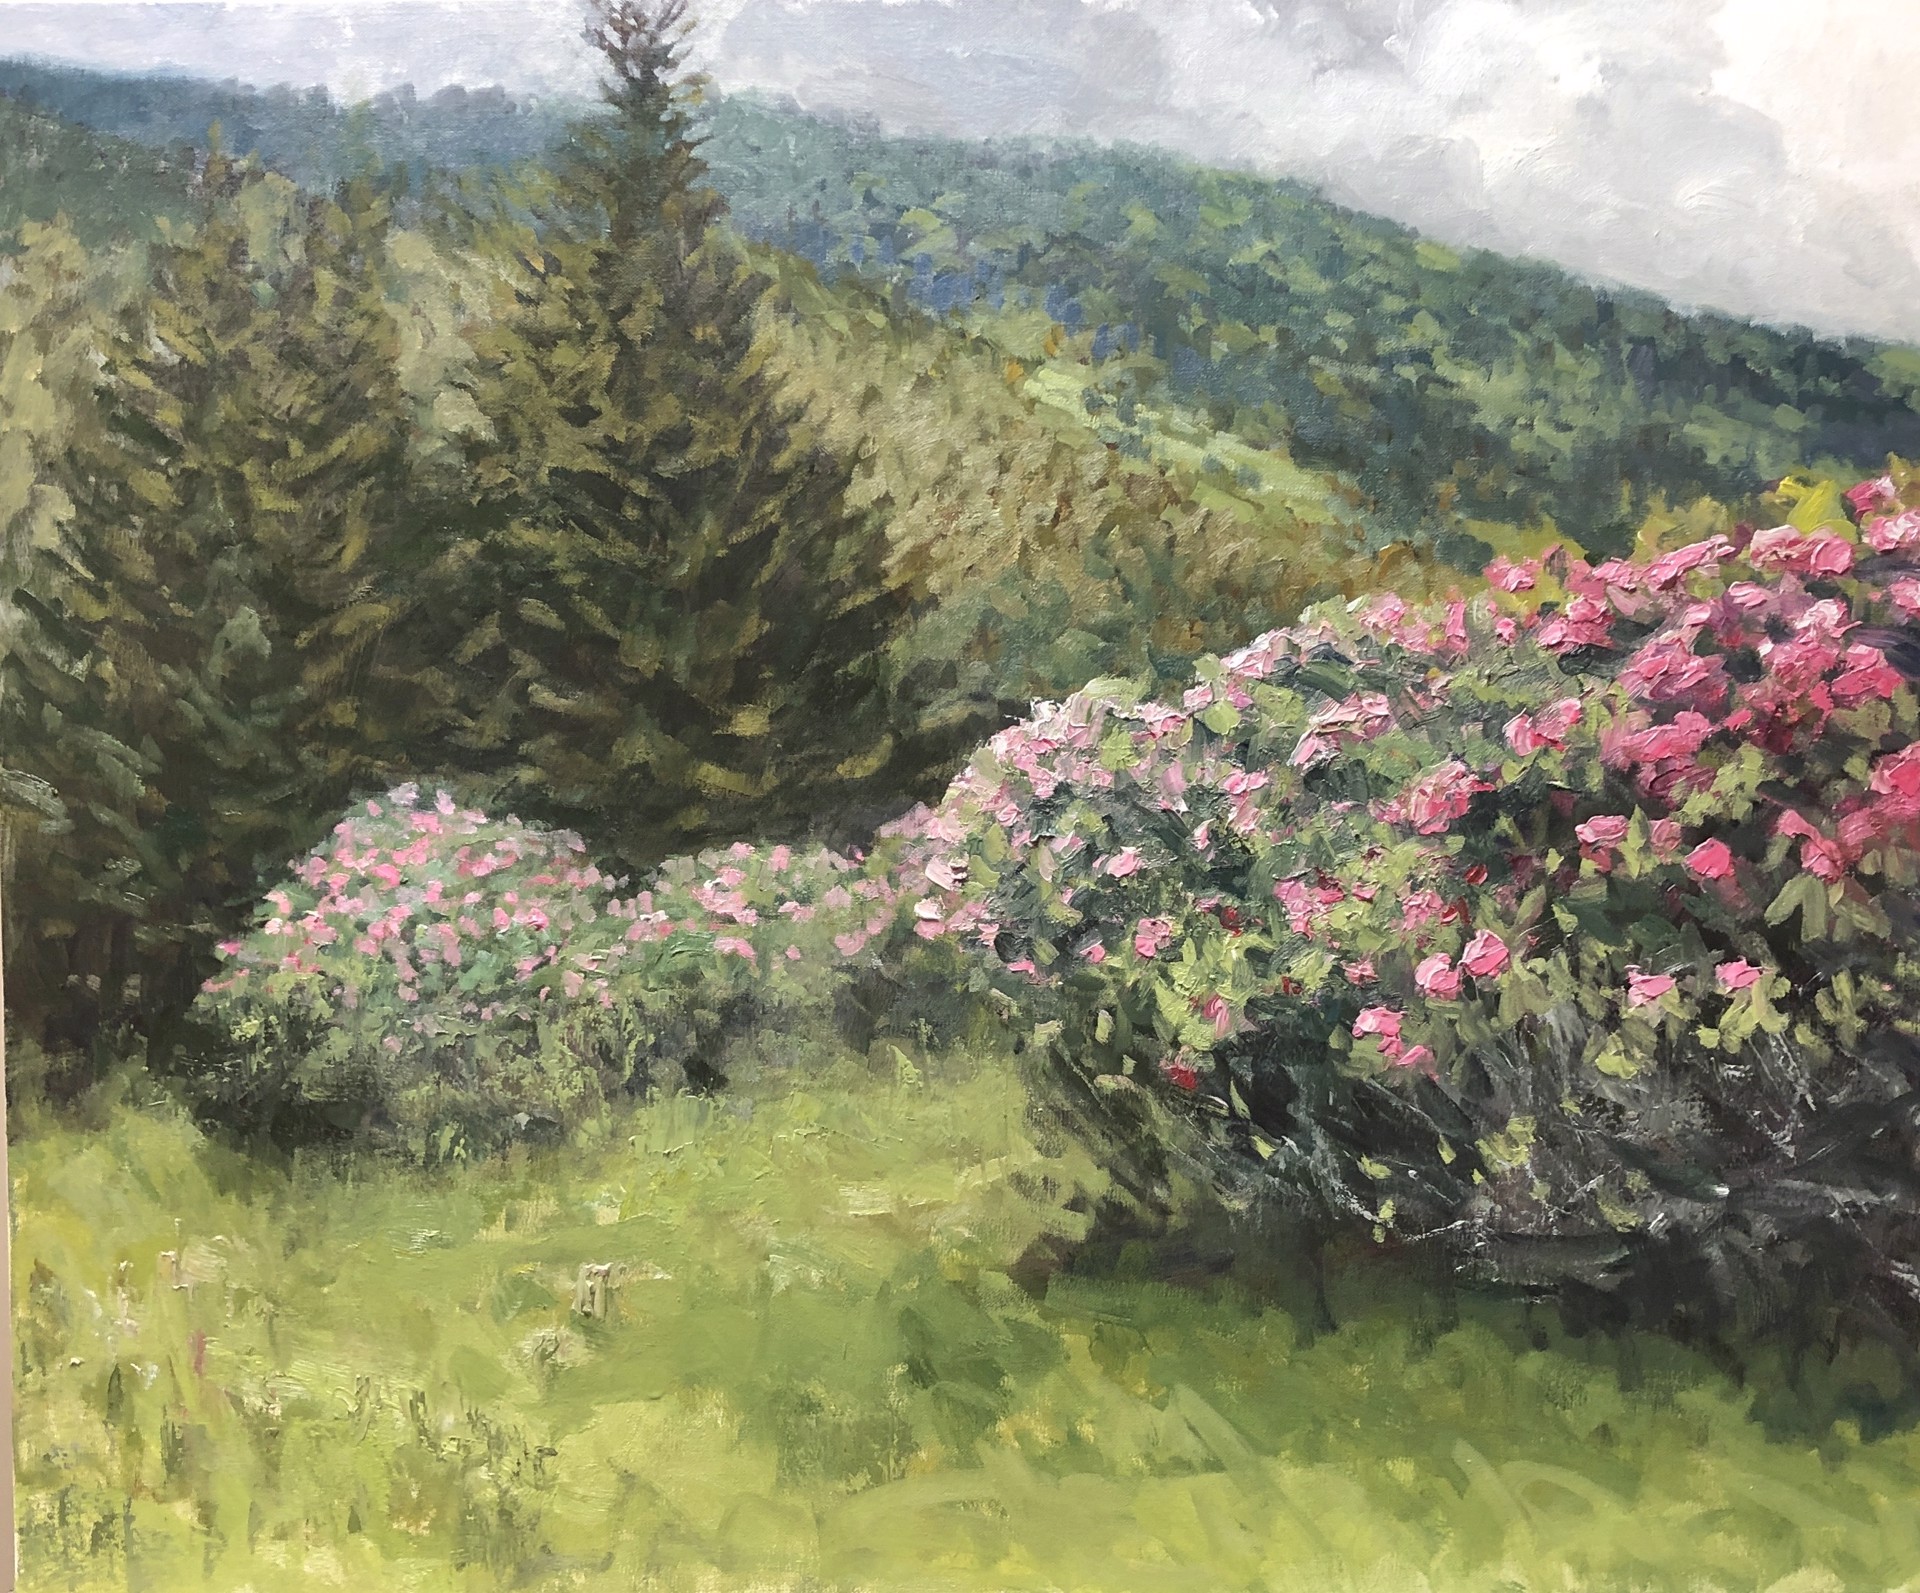 Rhododendron at Carvers Gap by Mitch Kolbe